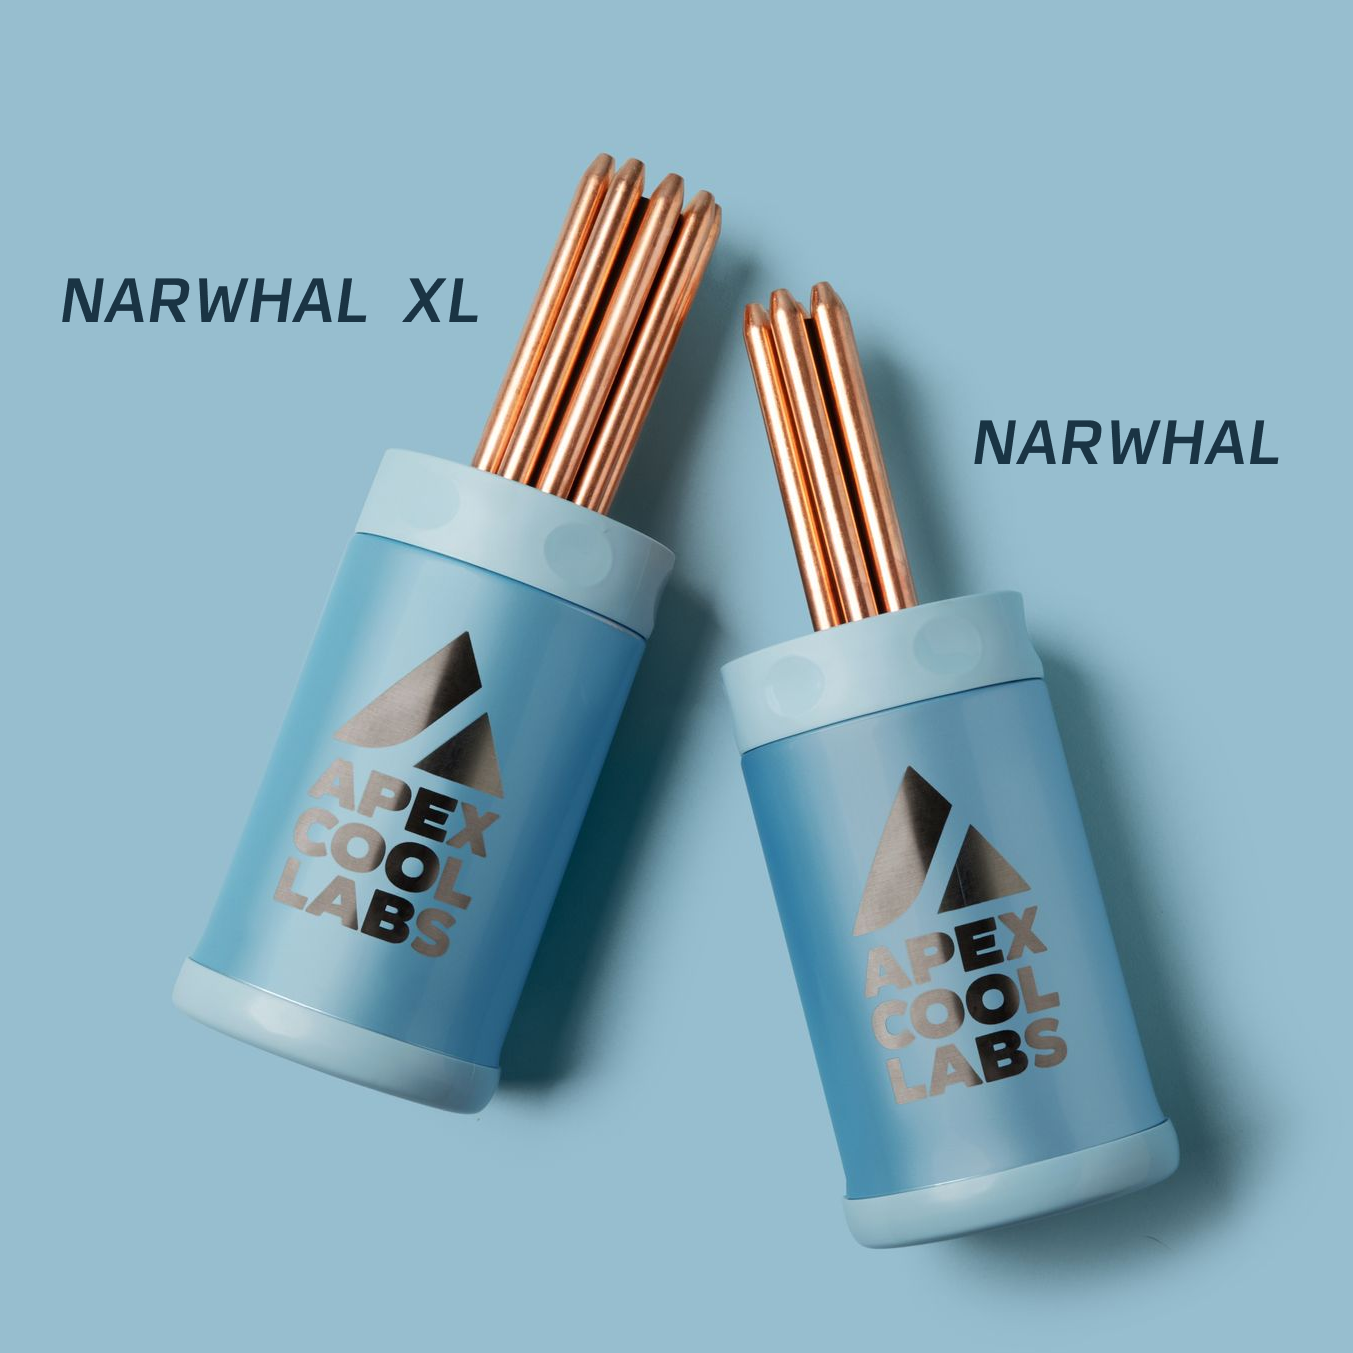 NARWHAL XLs: PALM COOLING DEVICES (SET OF 2)